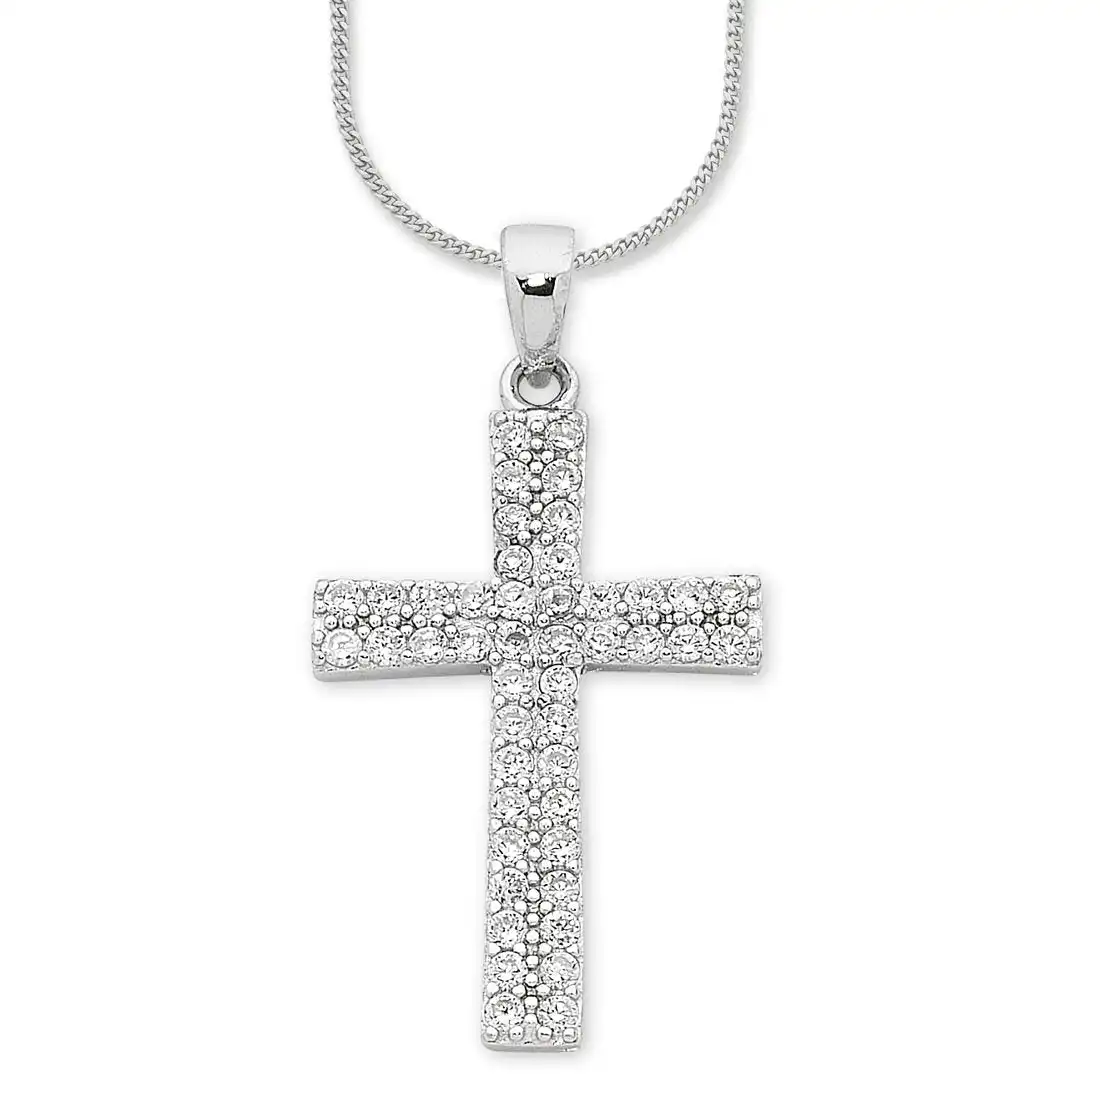 45cm Sterling Silver Cubic Zirconia Cross Necklace